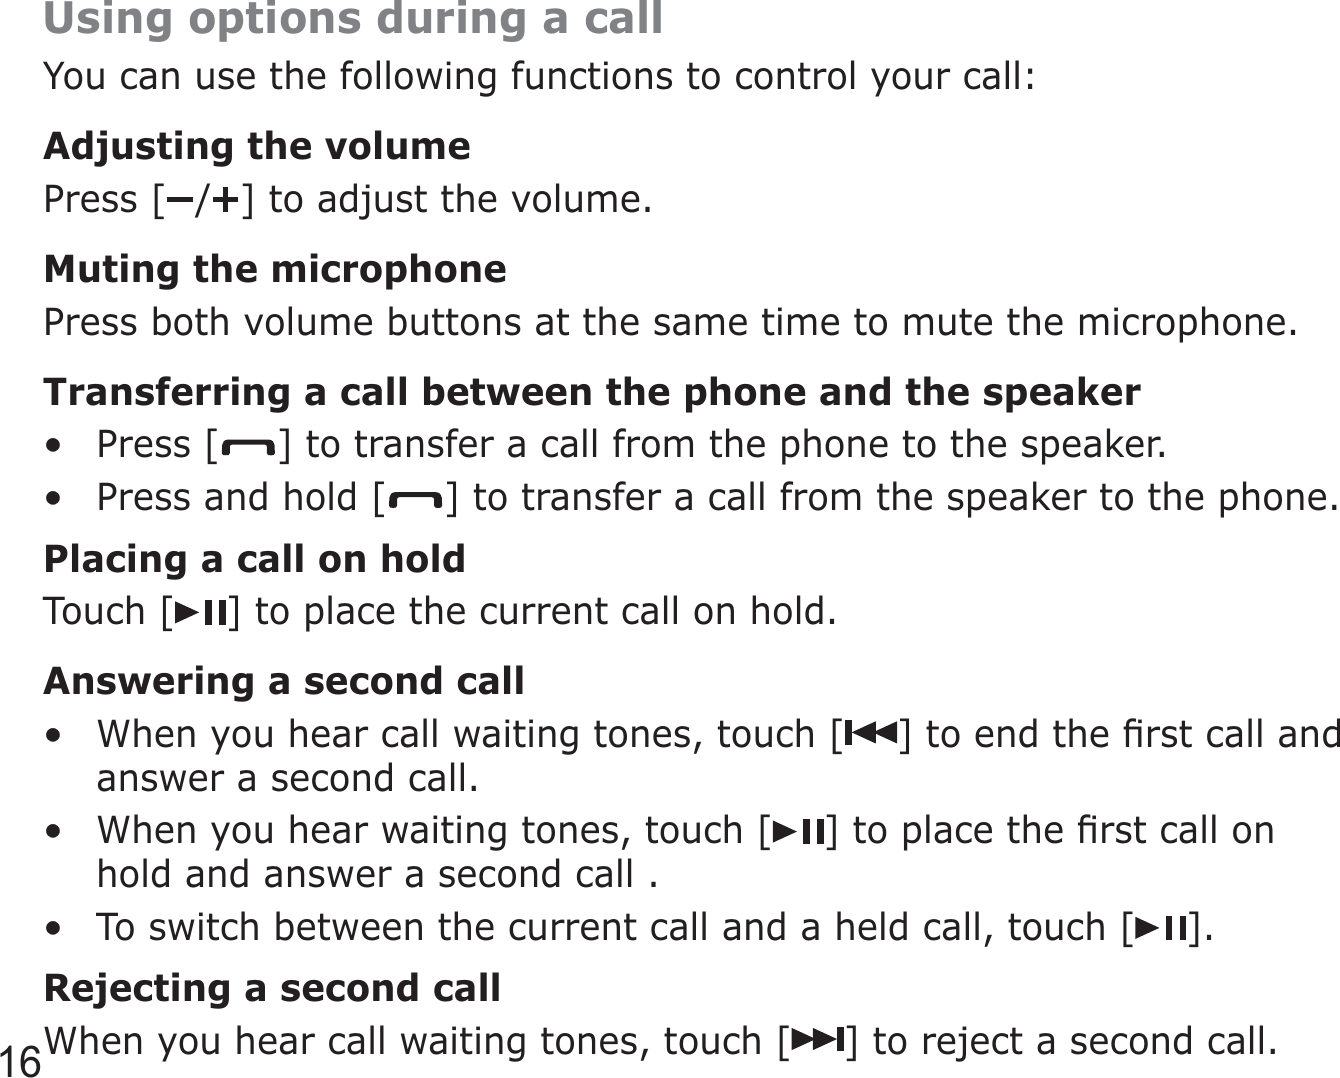 16Using options during a callYou can use the following functions to control your call:Adjusting the volumePress [ / ] to adjust the volume.Muting the microphonePress both volume buttons at the same time to mute the microphone.Transferring a call between the phone and the speakerPress [ ] to transfer a call from the phone to the speaker.Press and hold [ ] to transfer a call from the speaker to the phone.Placing a call on holdTouch [ ] to place the current call on hold.Answering a second callWhen you hear call waiting tones, touch [ ] to end the ﬁrst call and answer a second call.When you hear waiting tones, touch [ ] to place the ﬁrst call on hold and answer a second call .To switch between the current call and a held call, touch [ ].Rejecting a second callWhen you hear call waiting tones, touch [ ] to reject a second call.•••••